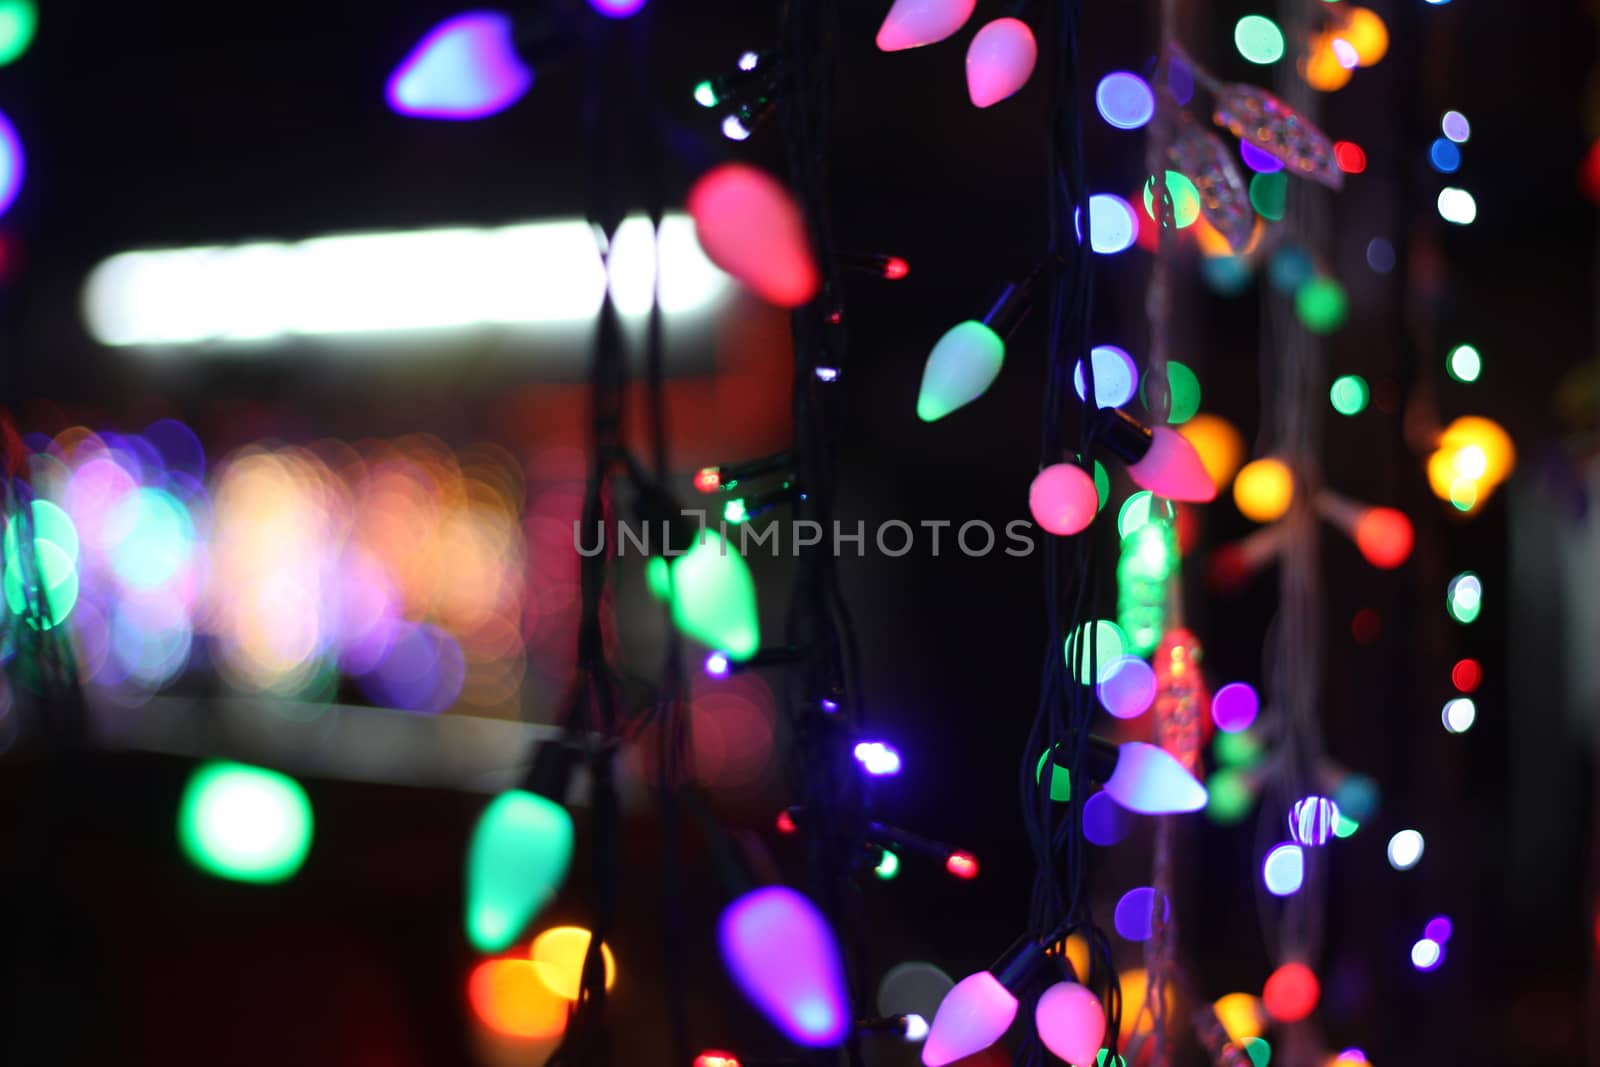 Colorful lights lit up on the occasion of Diwali / Christmas festival in India